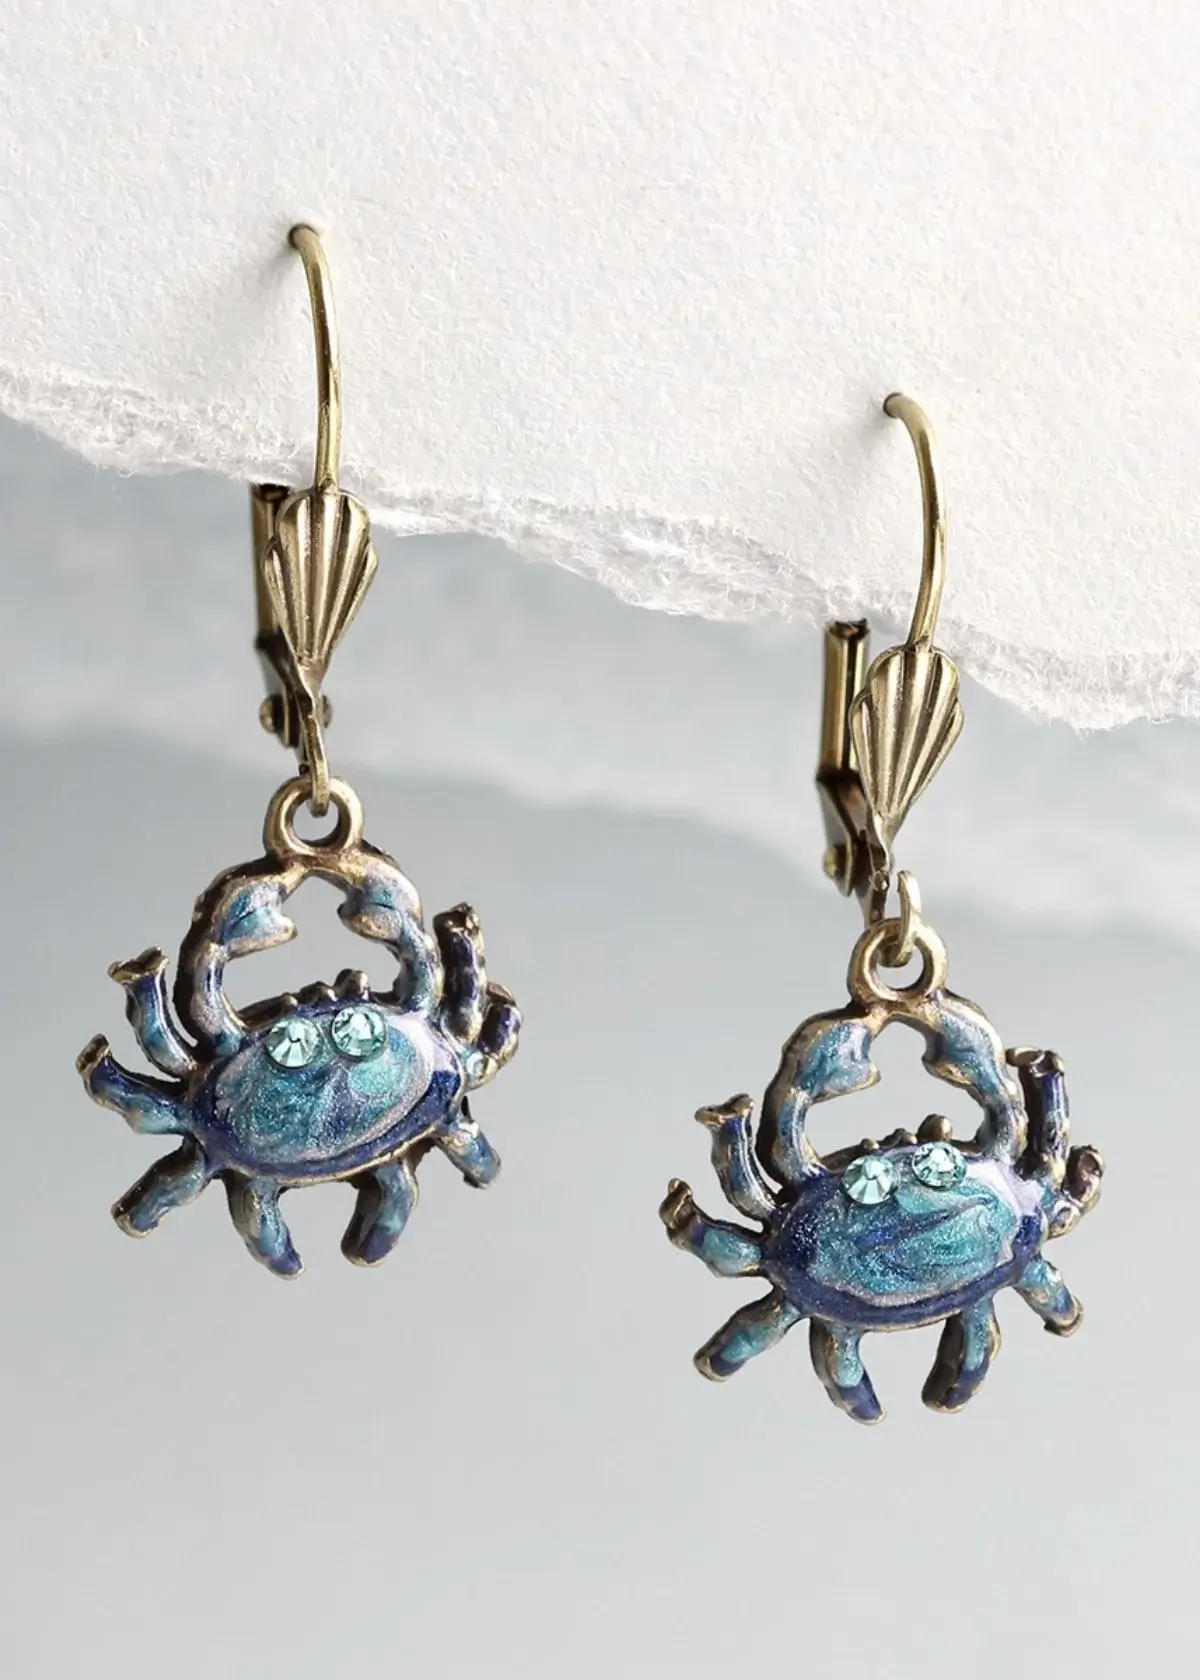 How to Choose the right crab earrings?